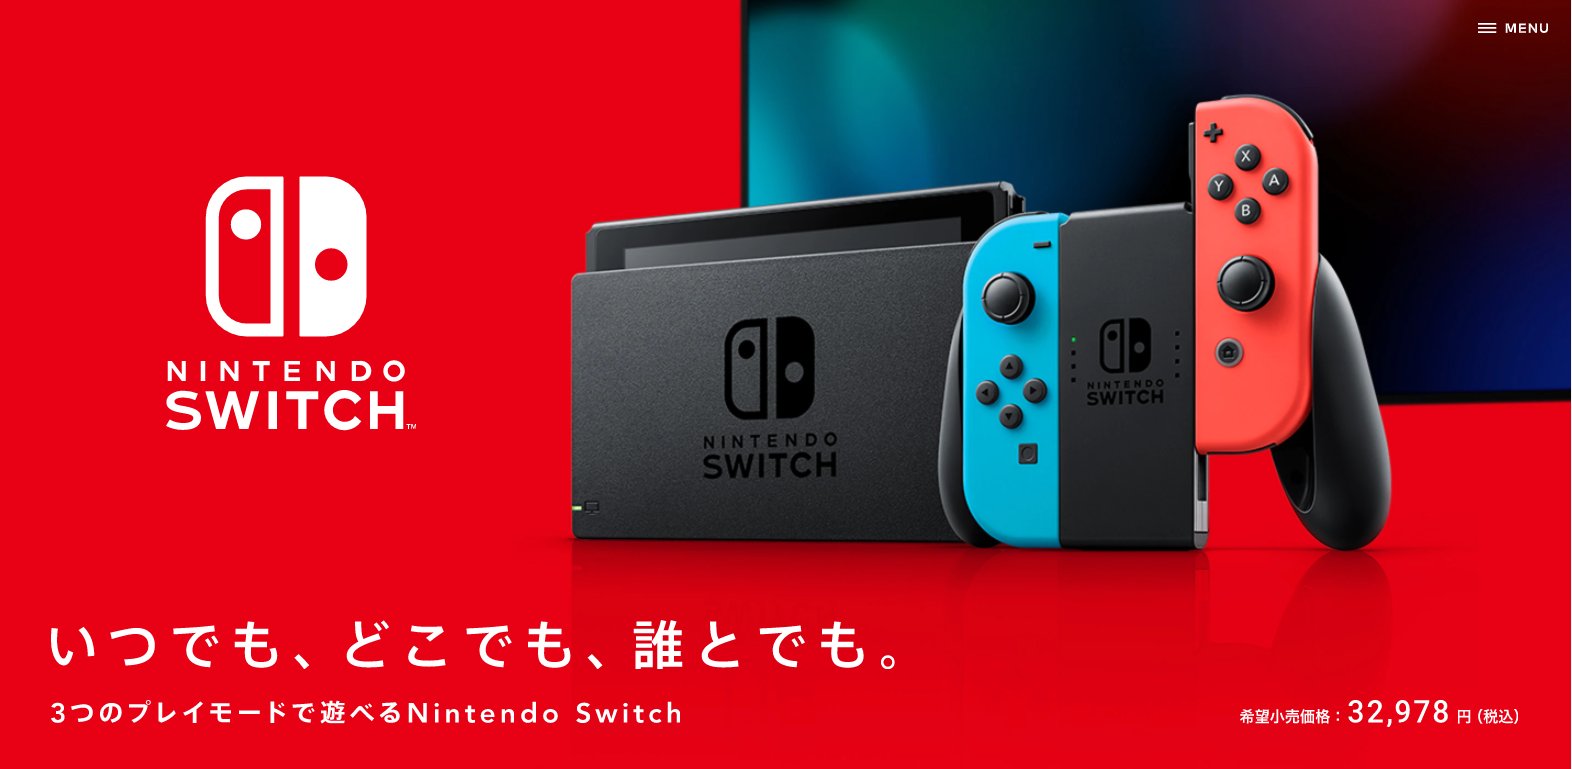 Nintendo Switch 約5カ月ぶりのアップデートを実施 Game Watch